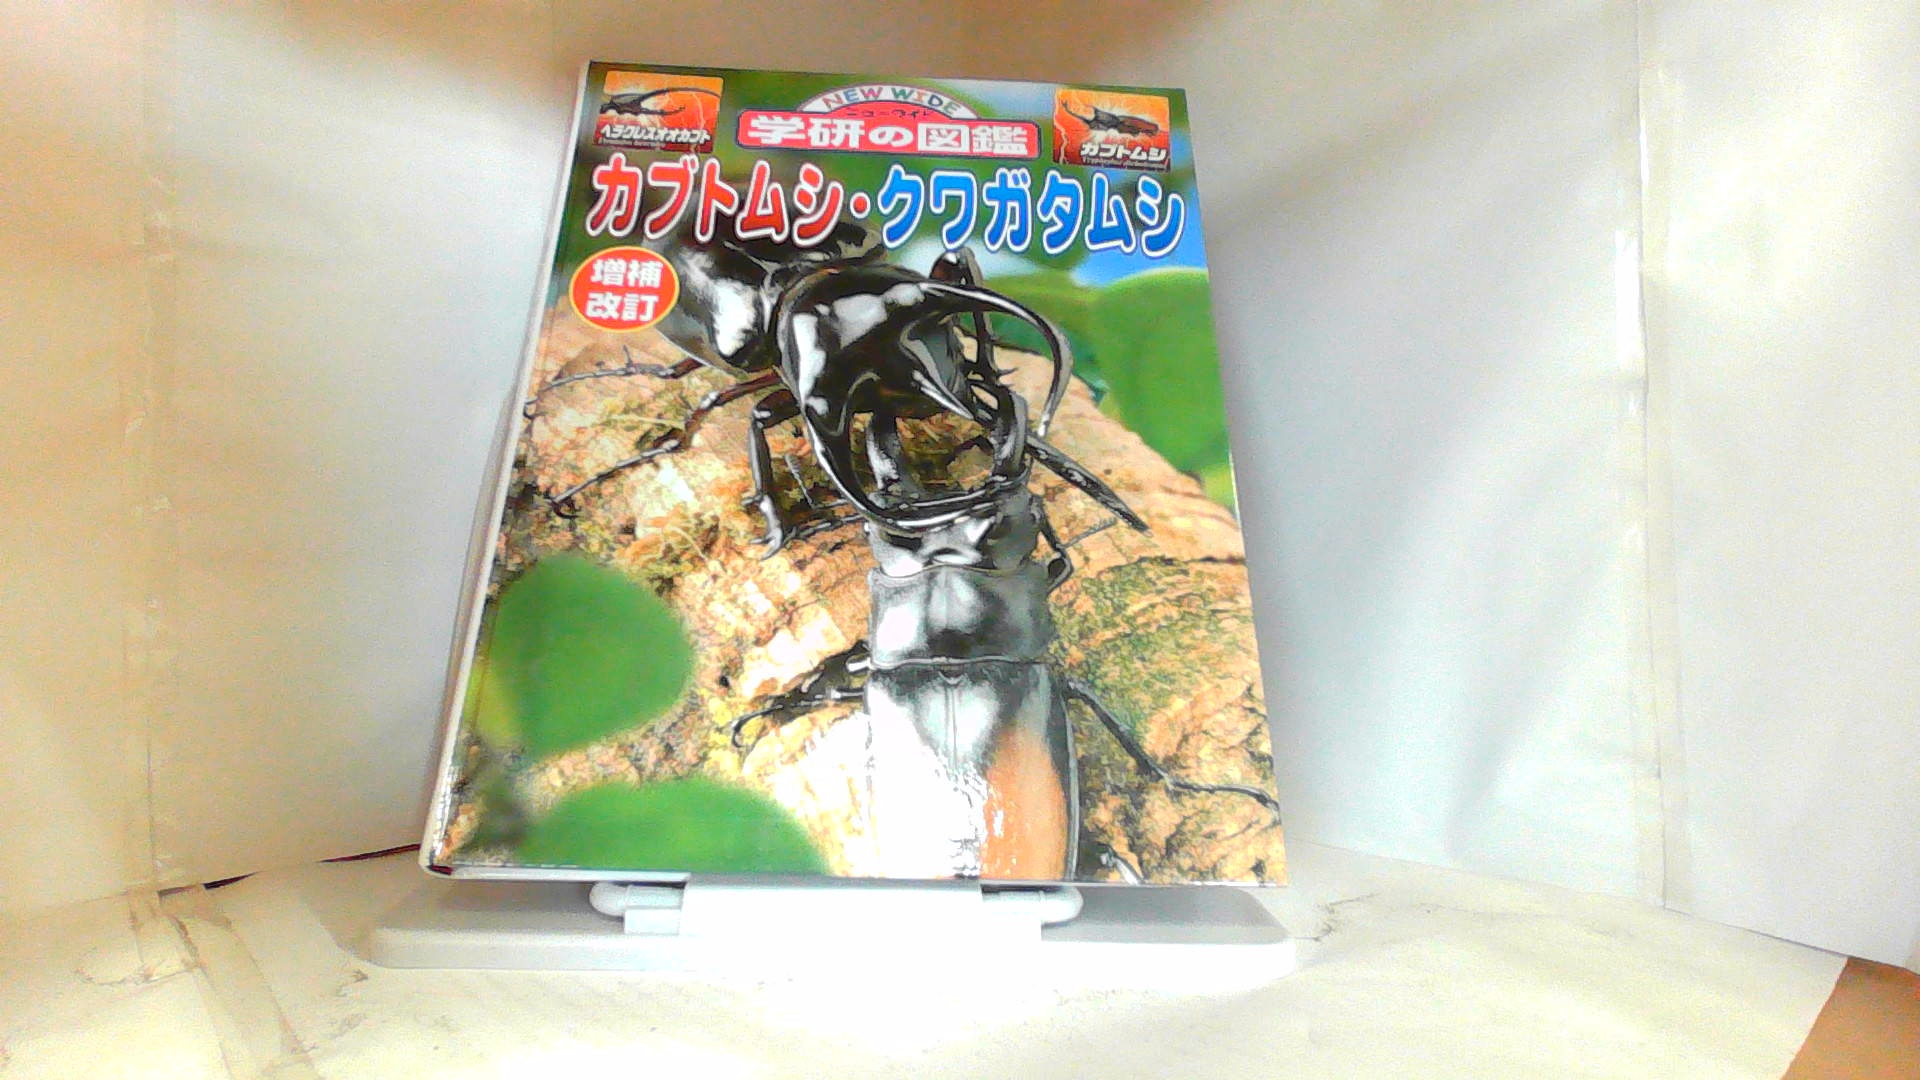  Gakken. illustrated reference book rhinoceros beetle * stag beetle 2013 year 5 month 17 day issue 